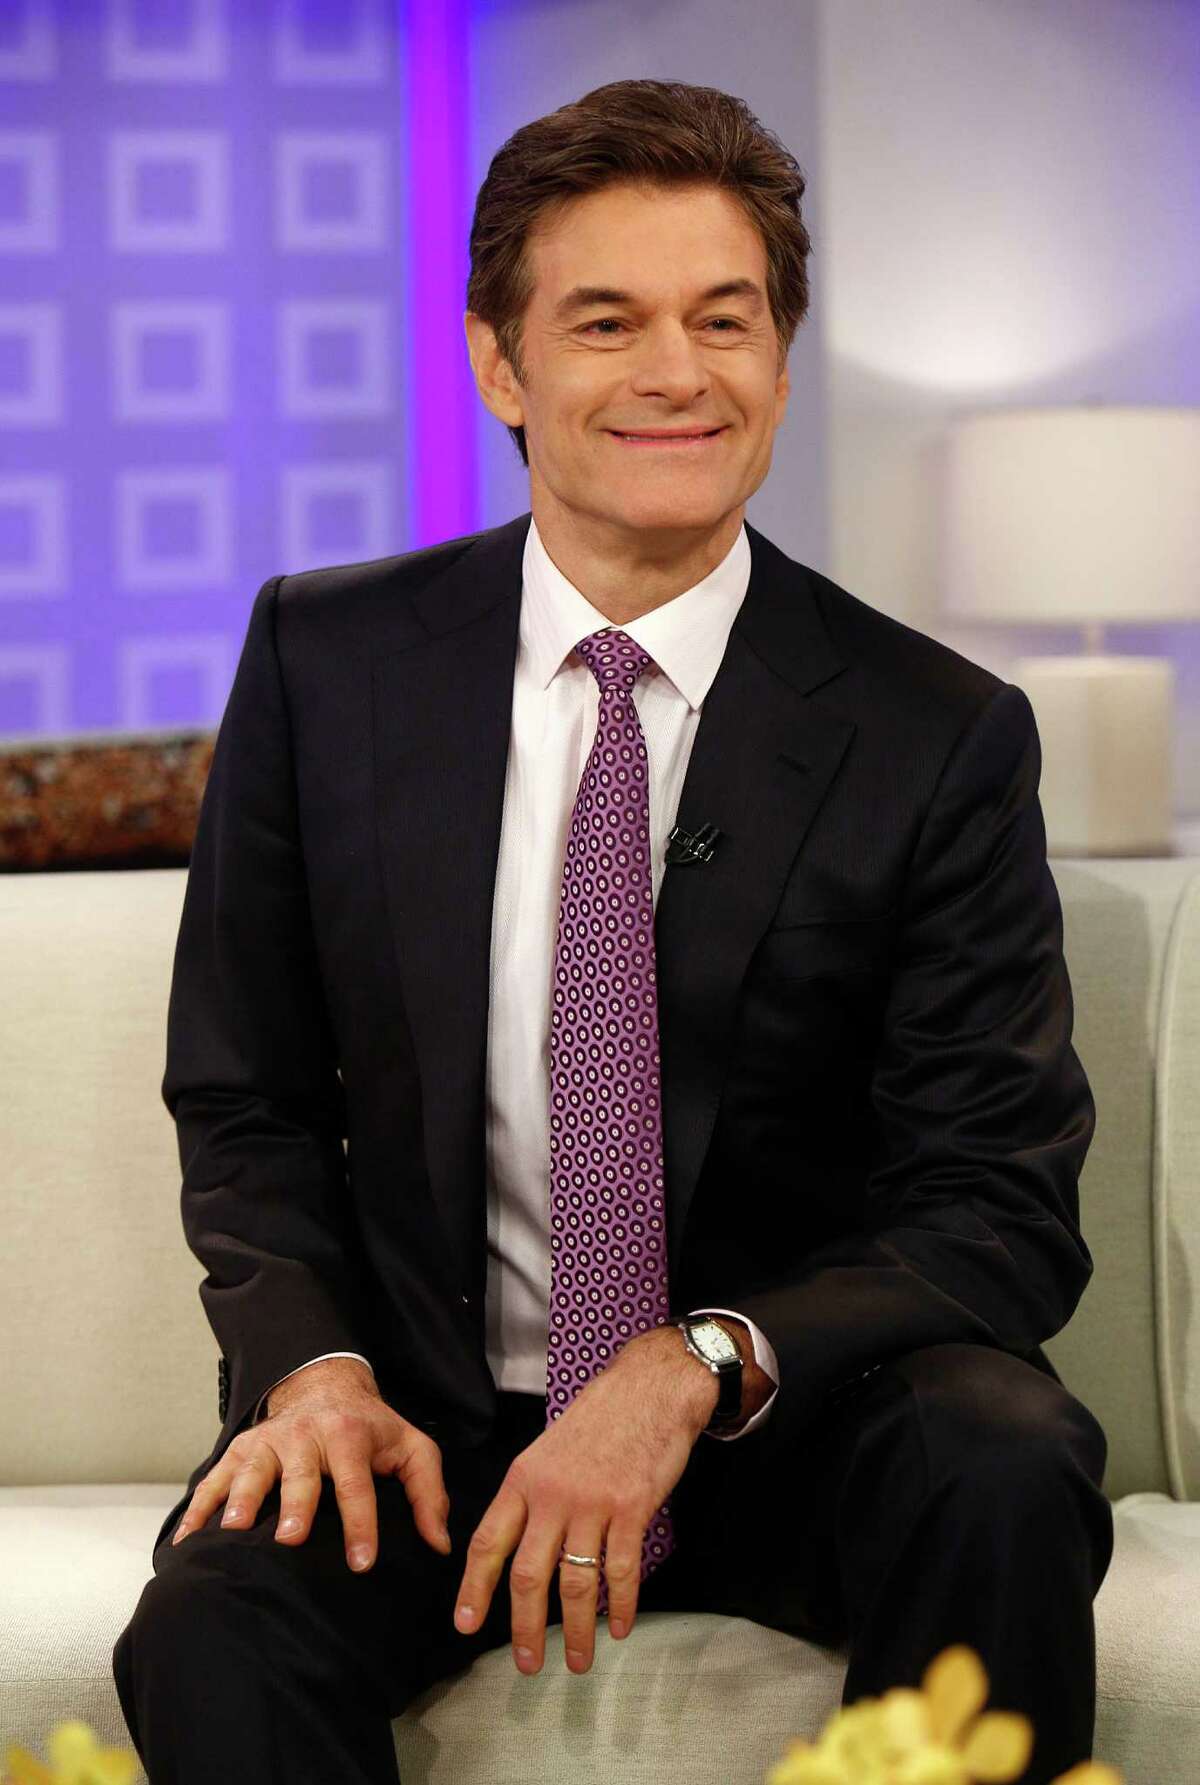 Several TV stations pull Dr. Oz show as host runs for Senate (Photo by: Peter Kramer/NBC/NBC NewsWire)